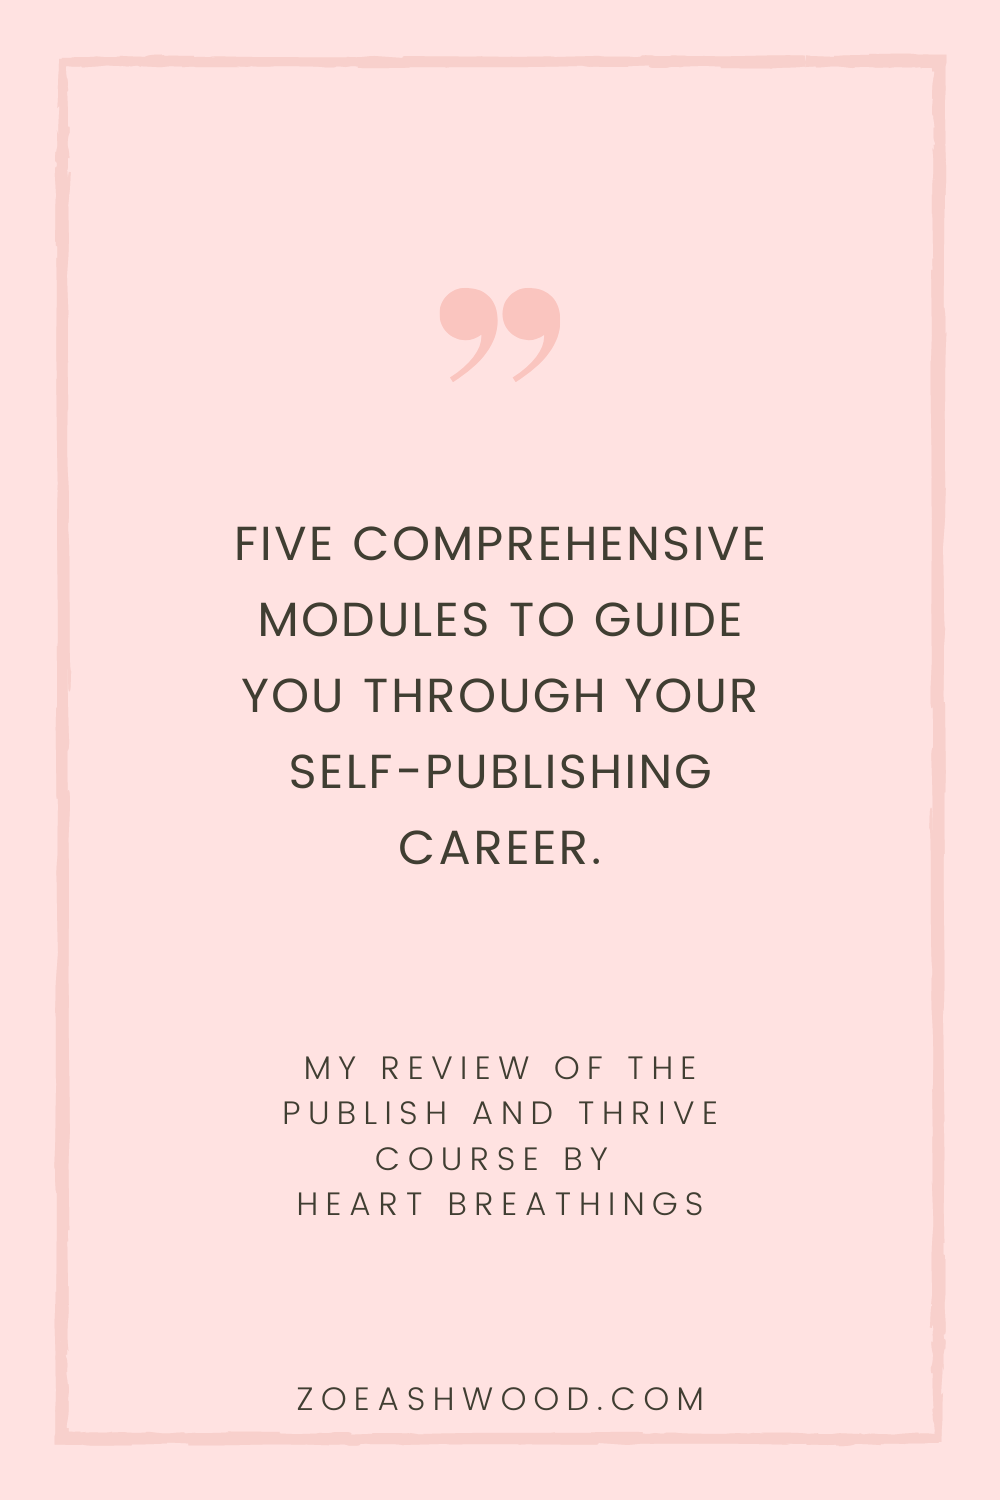 Publish and Thrive Course by Heart Breathings - Course Review by Zoe Ashwood